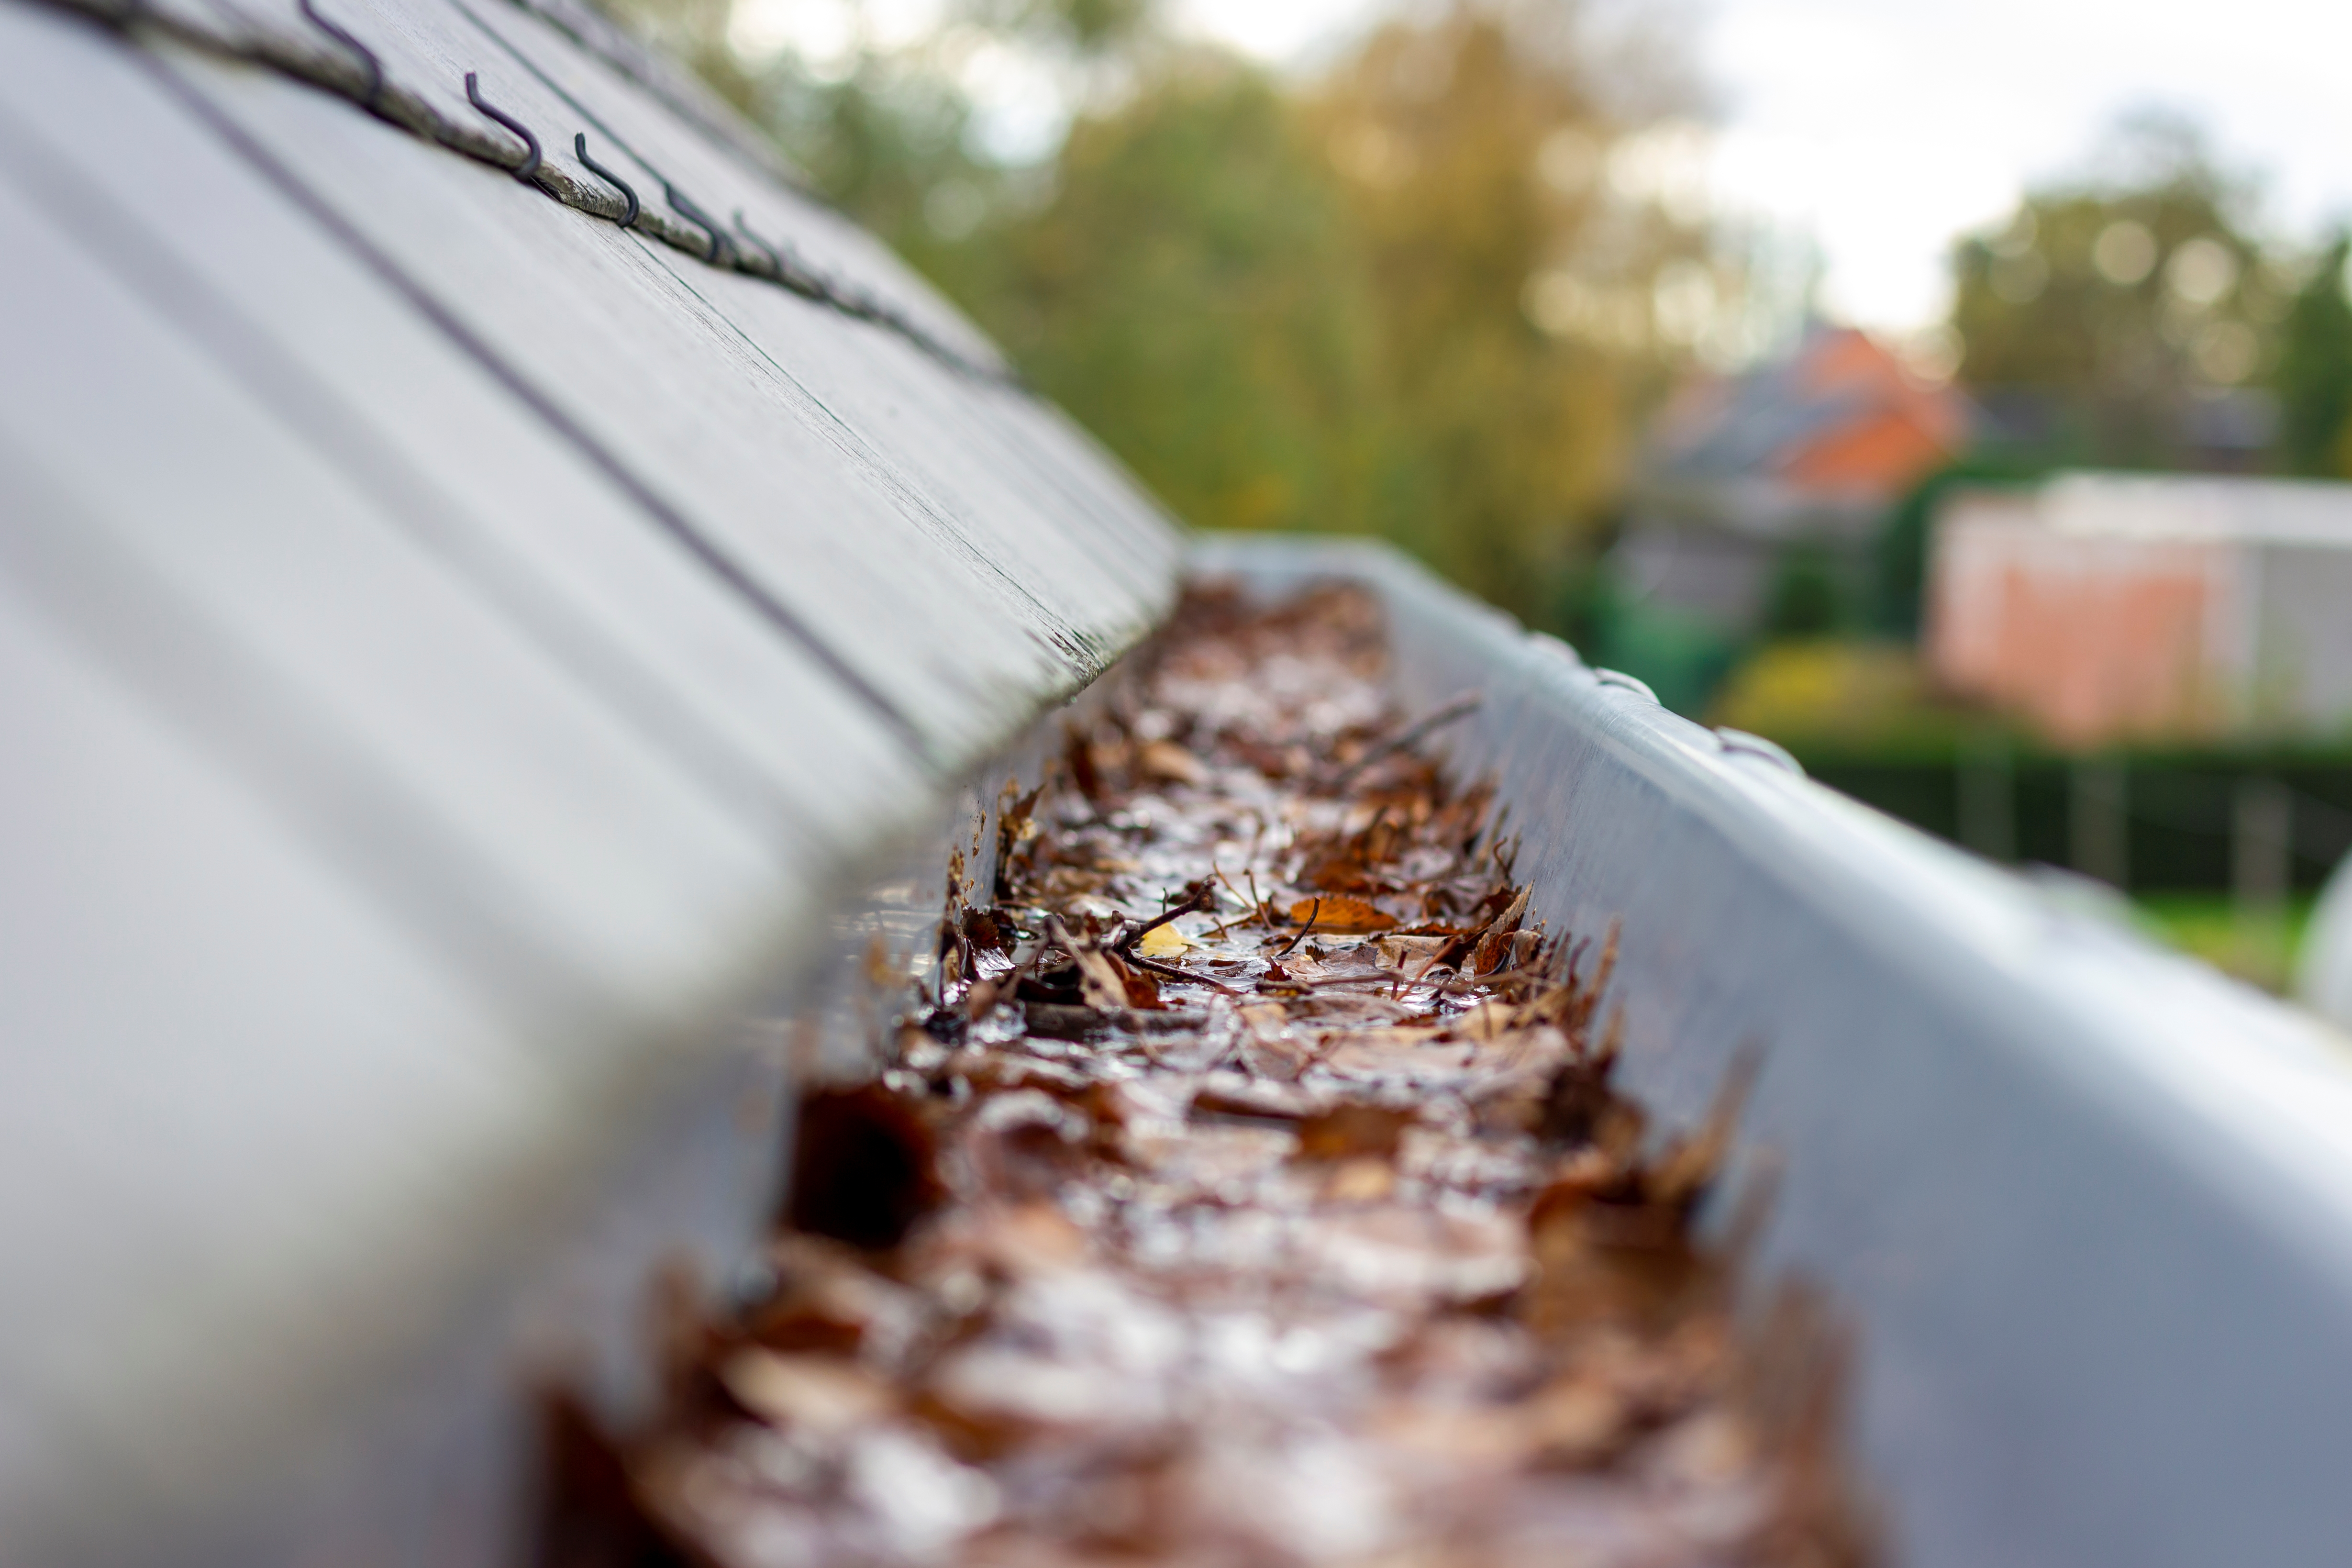 Close Up Image of Gutter Full of Leaves and Debris